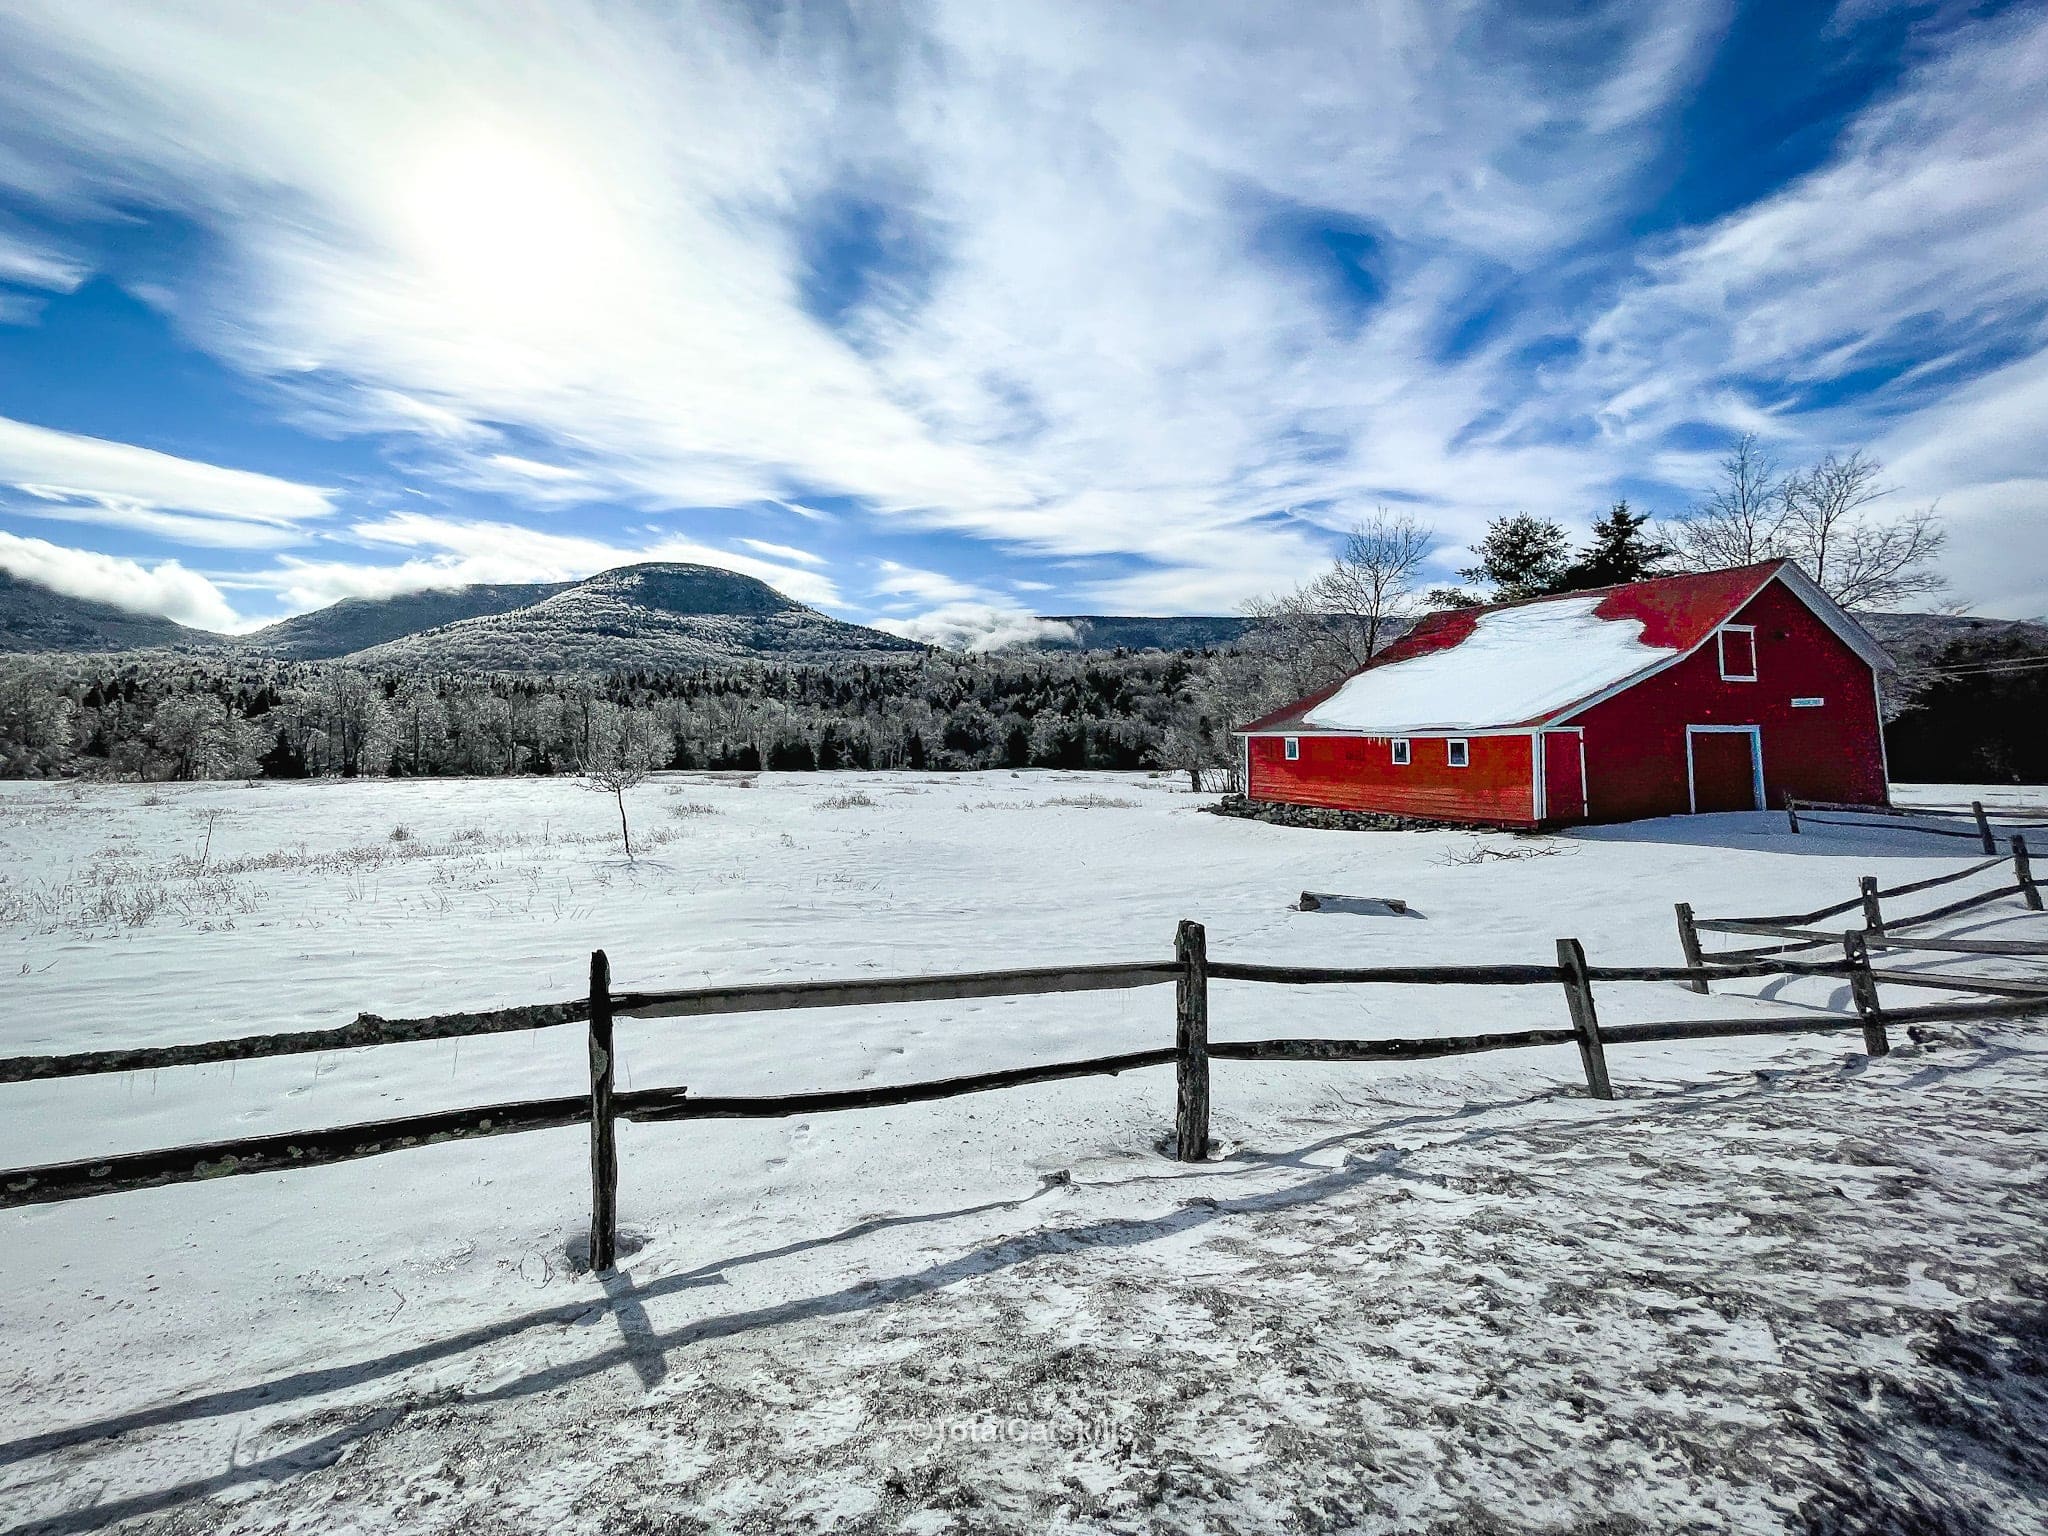 catskills red barn and sugarloaf mountain seen in the snow